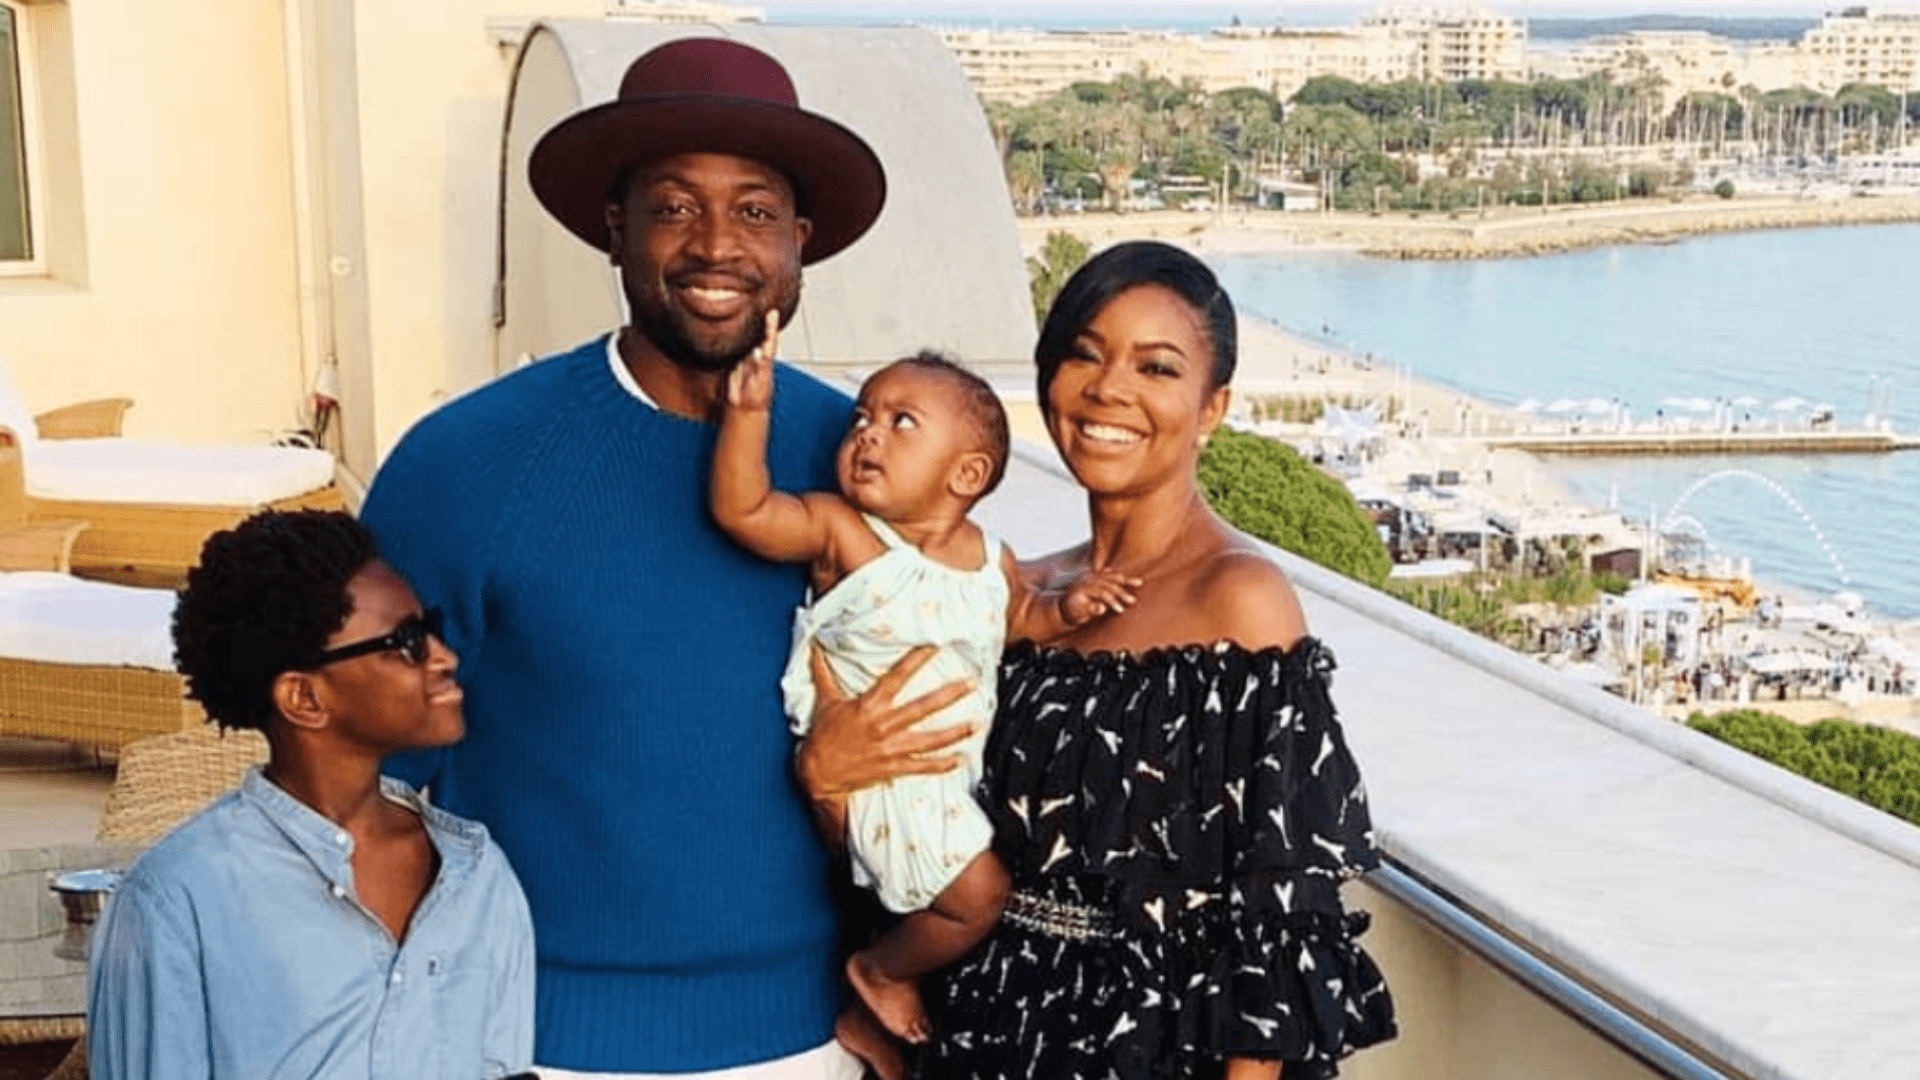 Gabrielle Union Is The Happiest On Her Vacay With Dwyane Wade - See The Gorgeous Photos